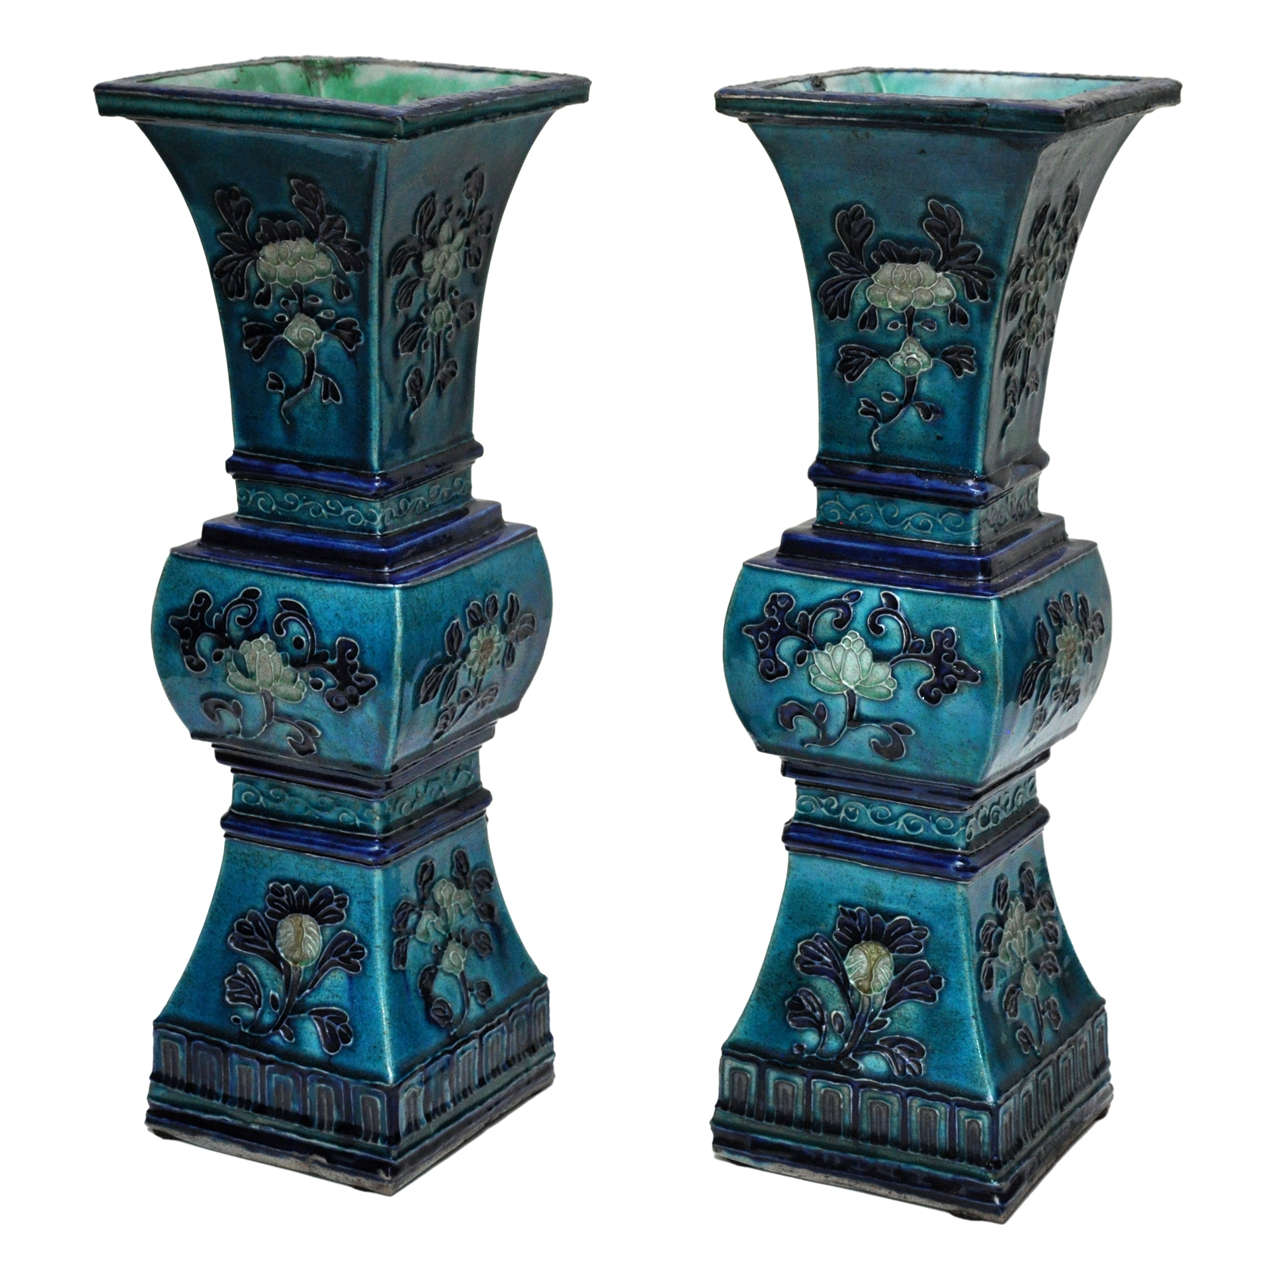 Pair of Chinese Turquoise Stoneware Vases, 19th c.